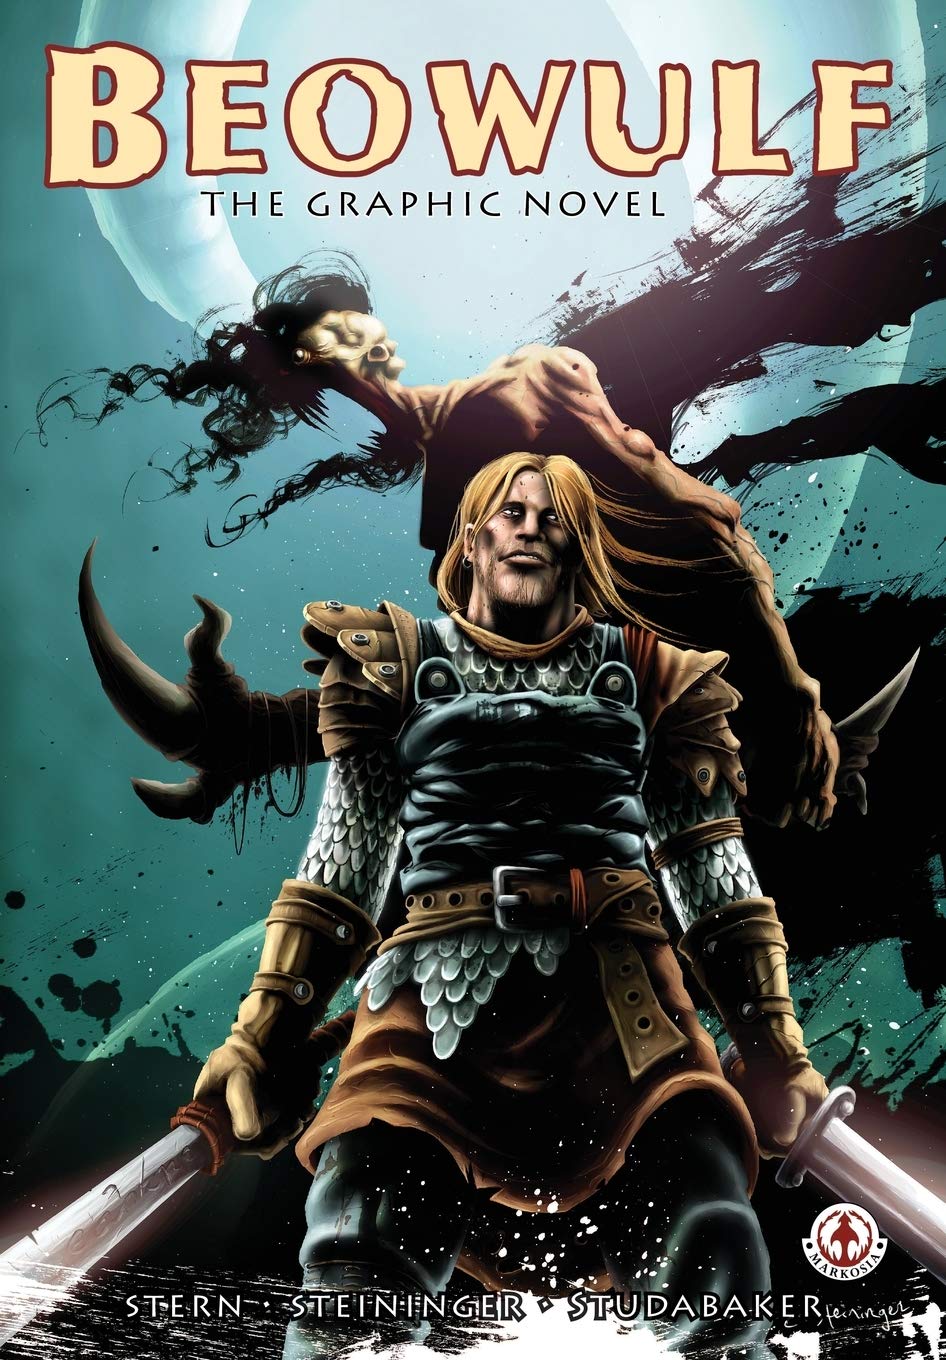 Beowulf the Graphic Novel